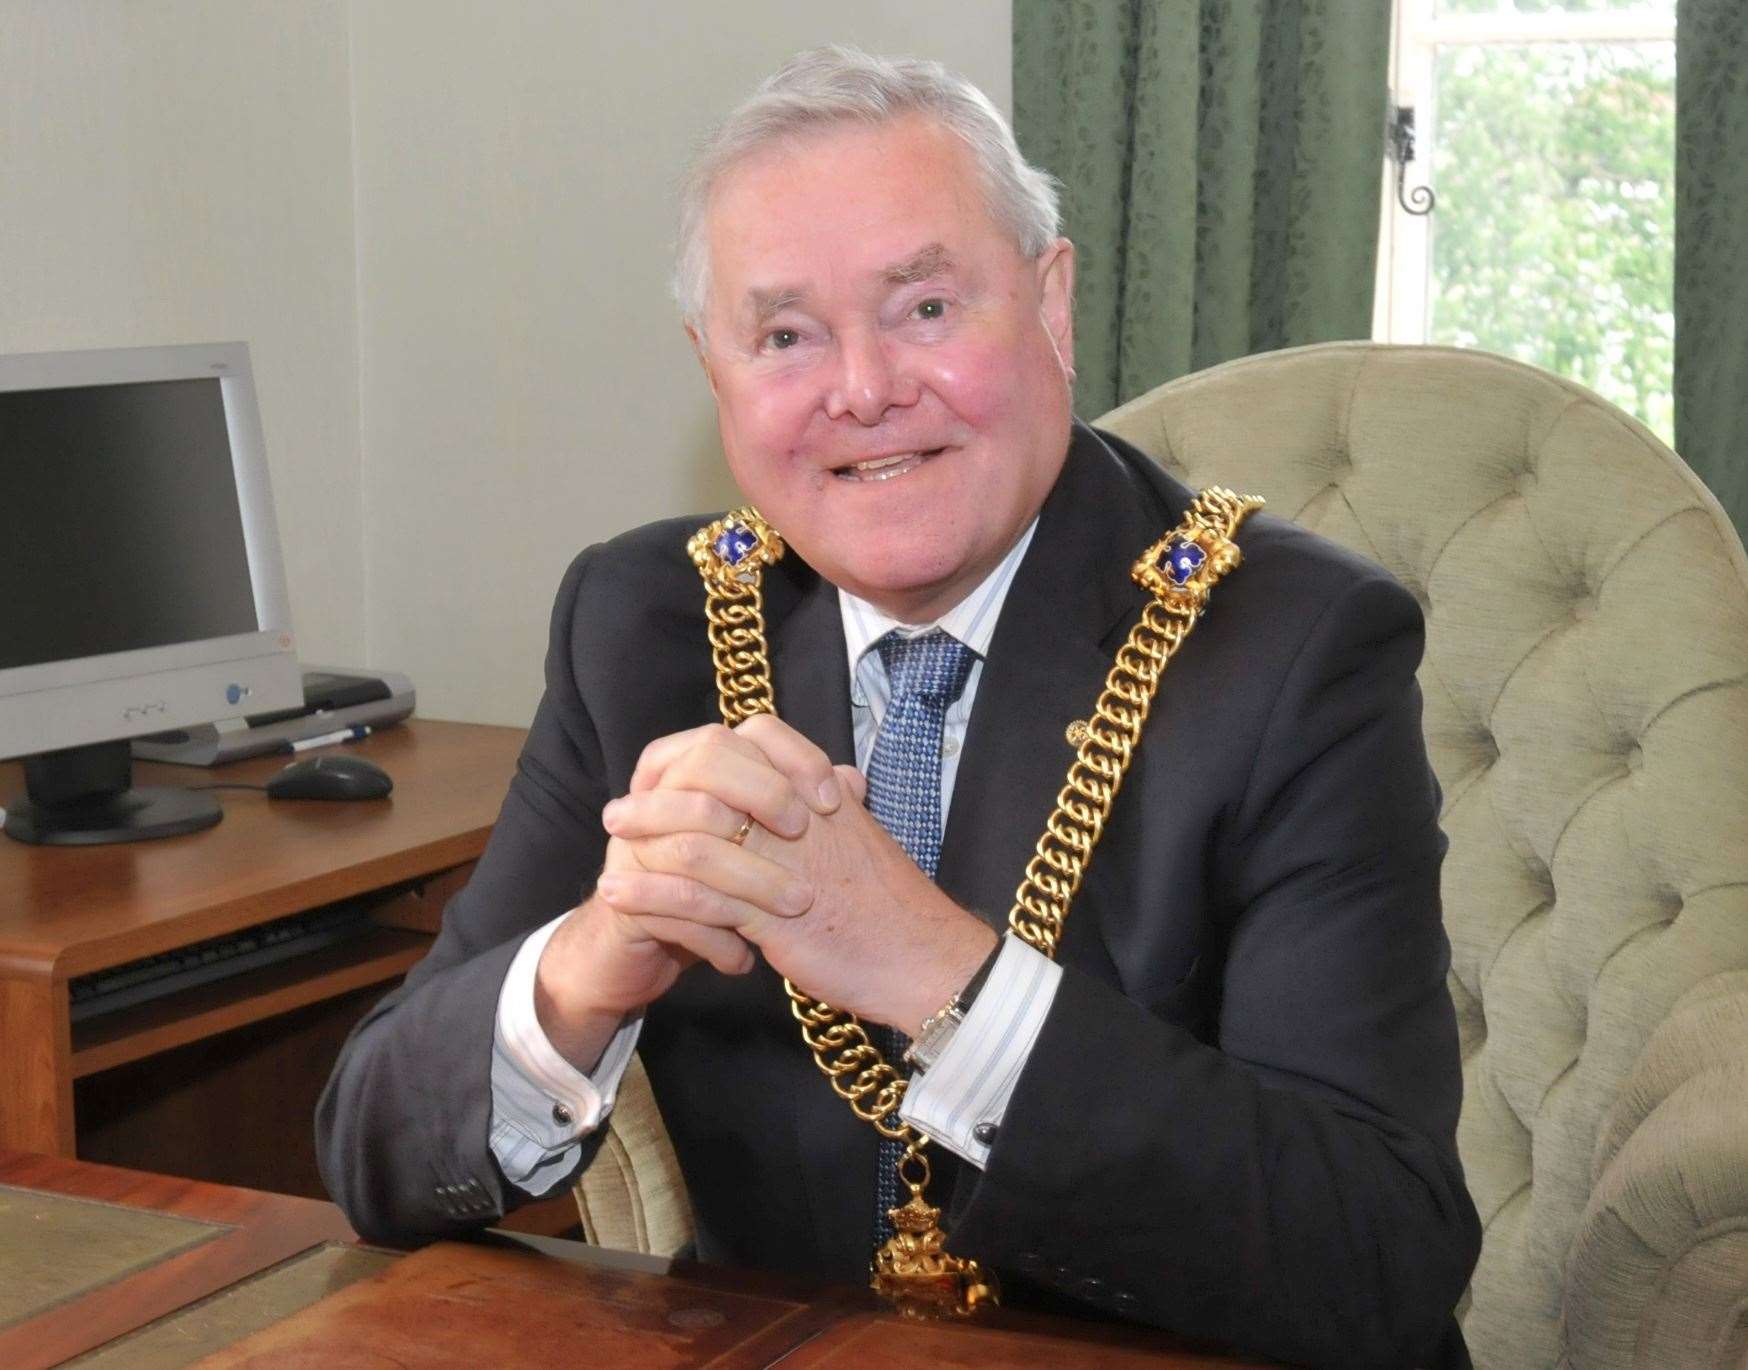 Former Lord Mayor of Canterbury Harry Cragg has died aged 85